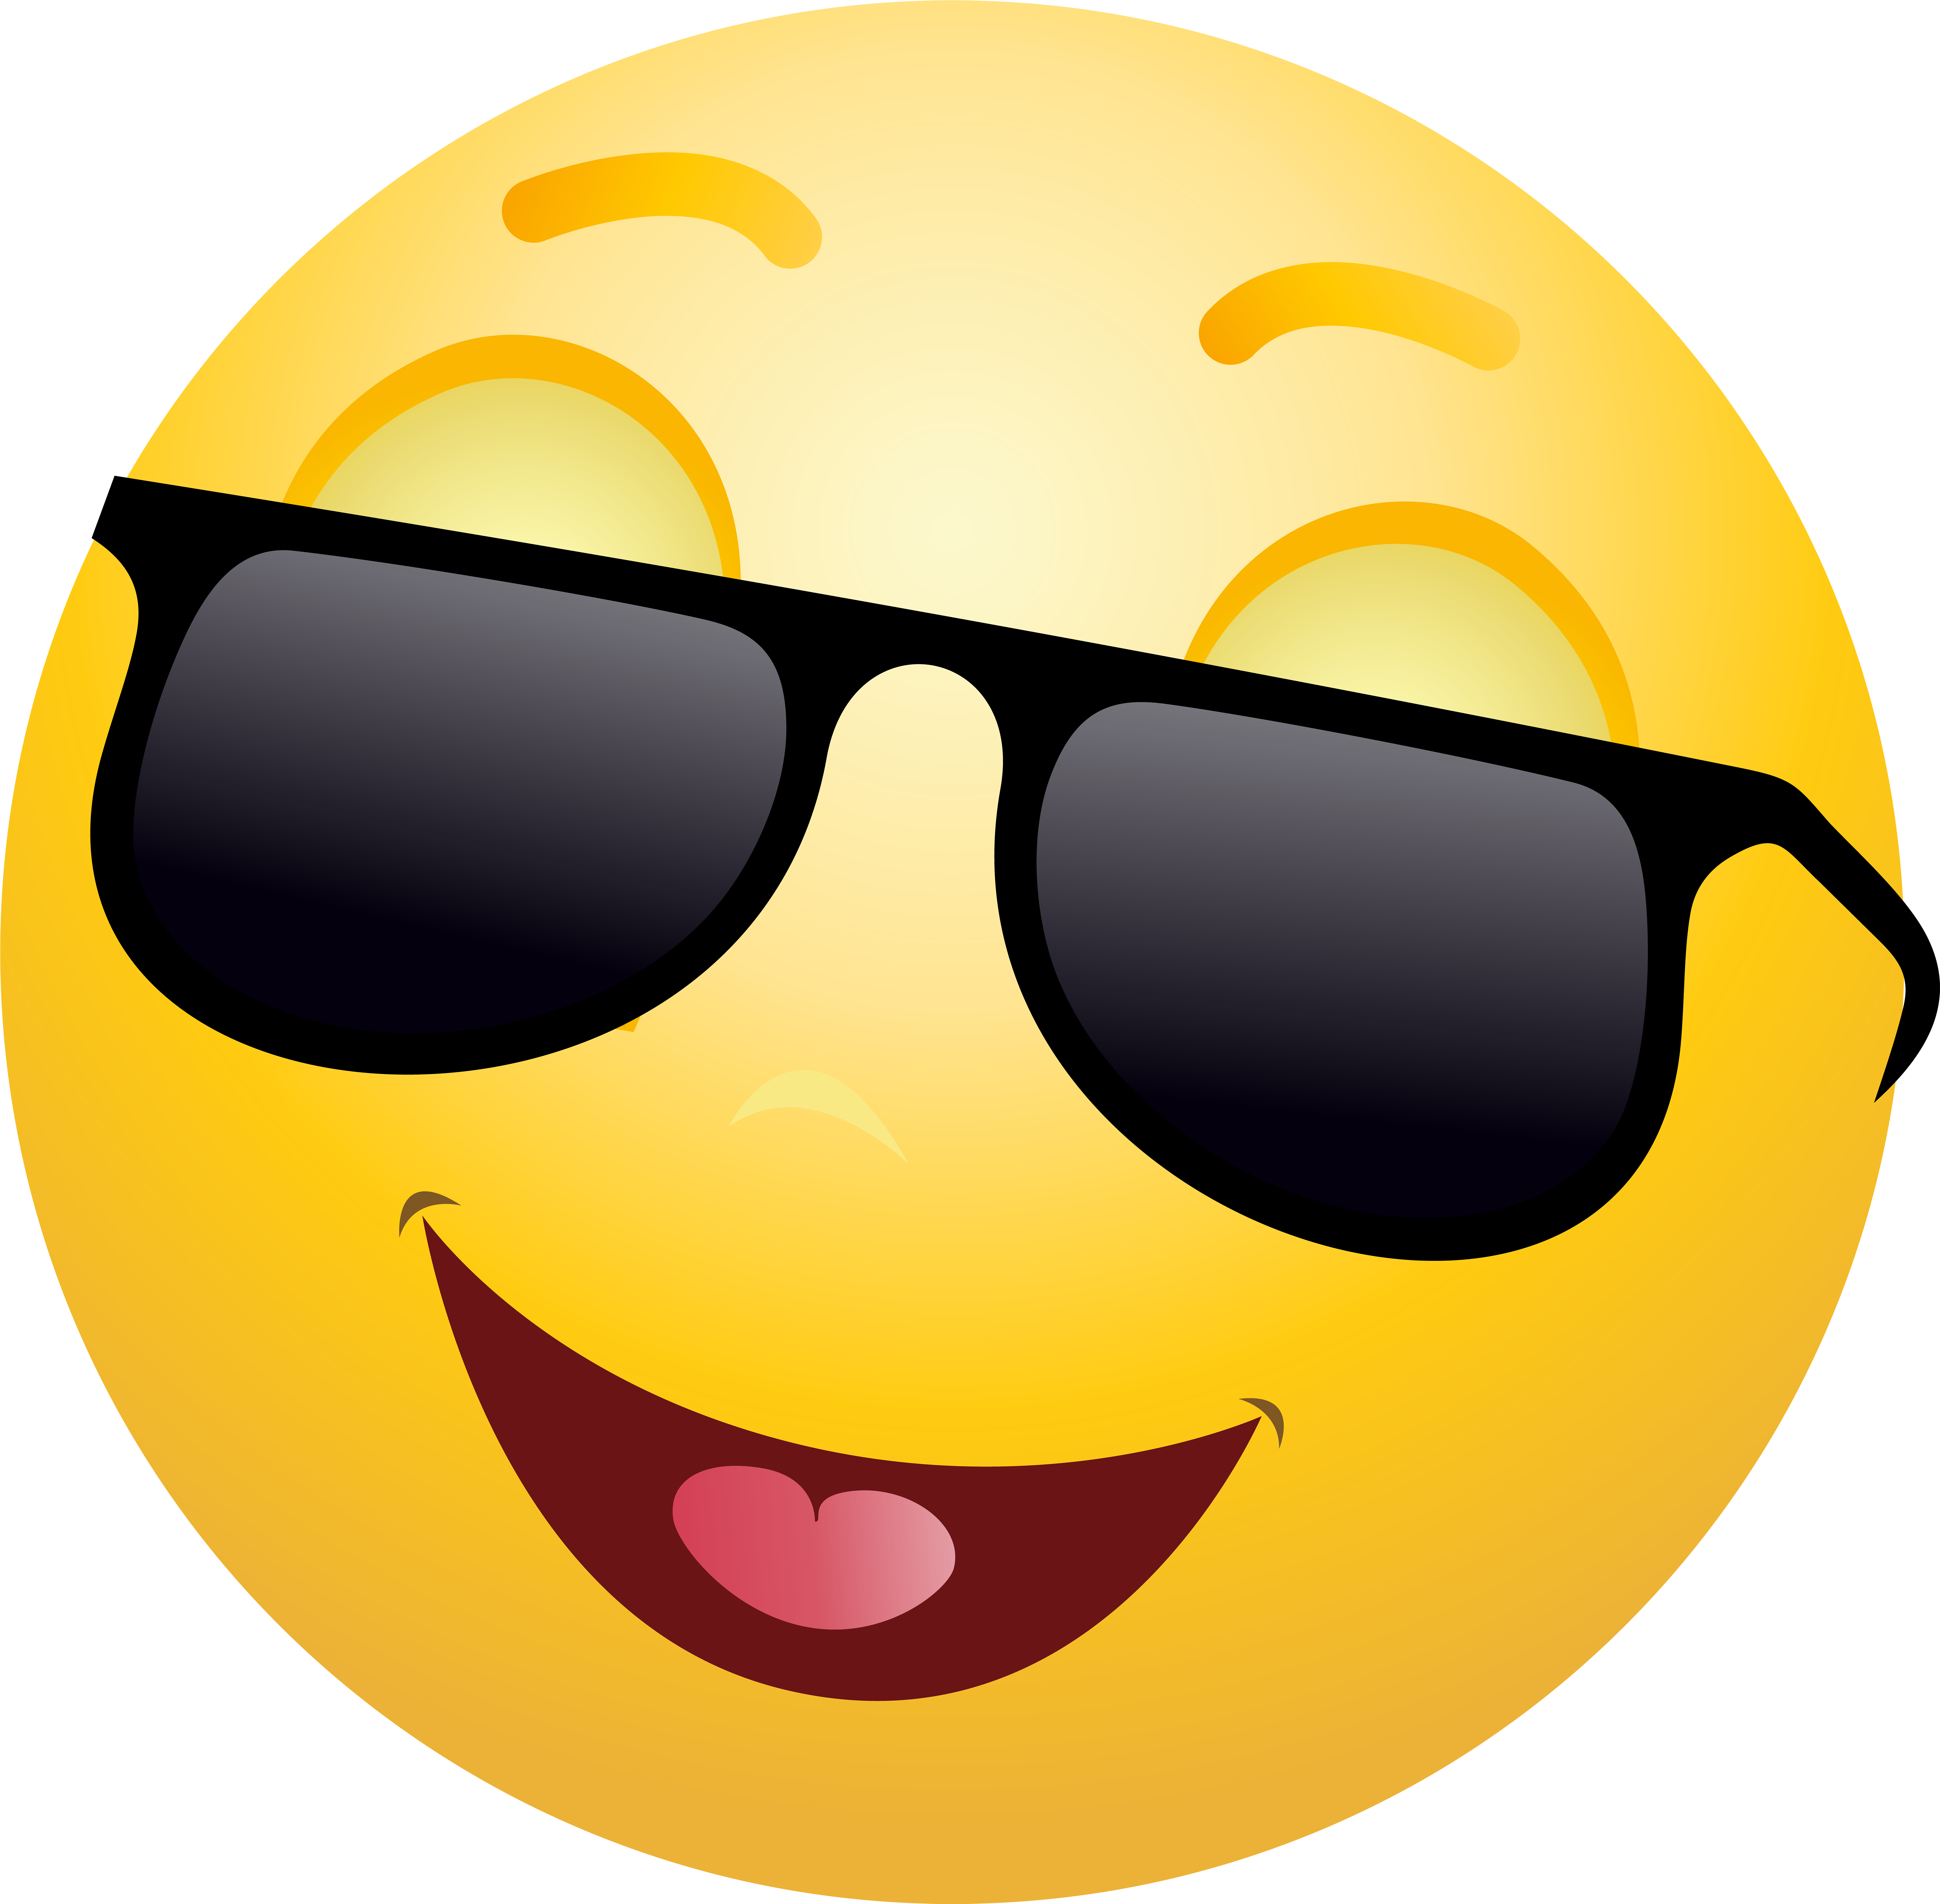 A Yellow Smiley Face Wearing Sunglasses